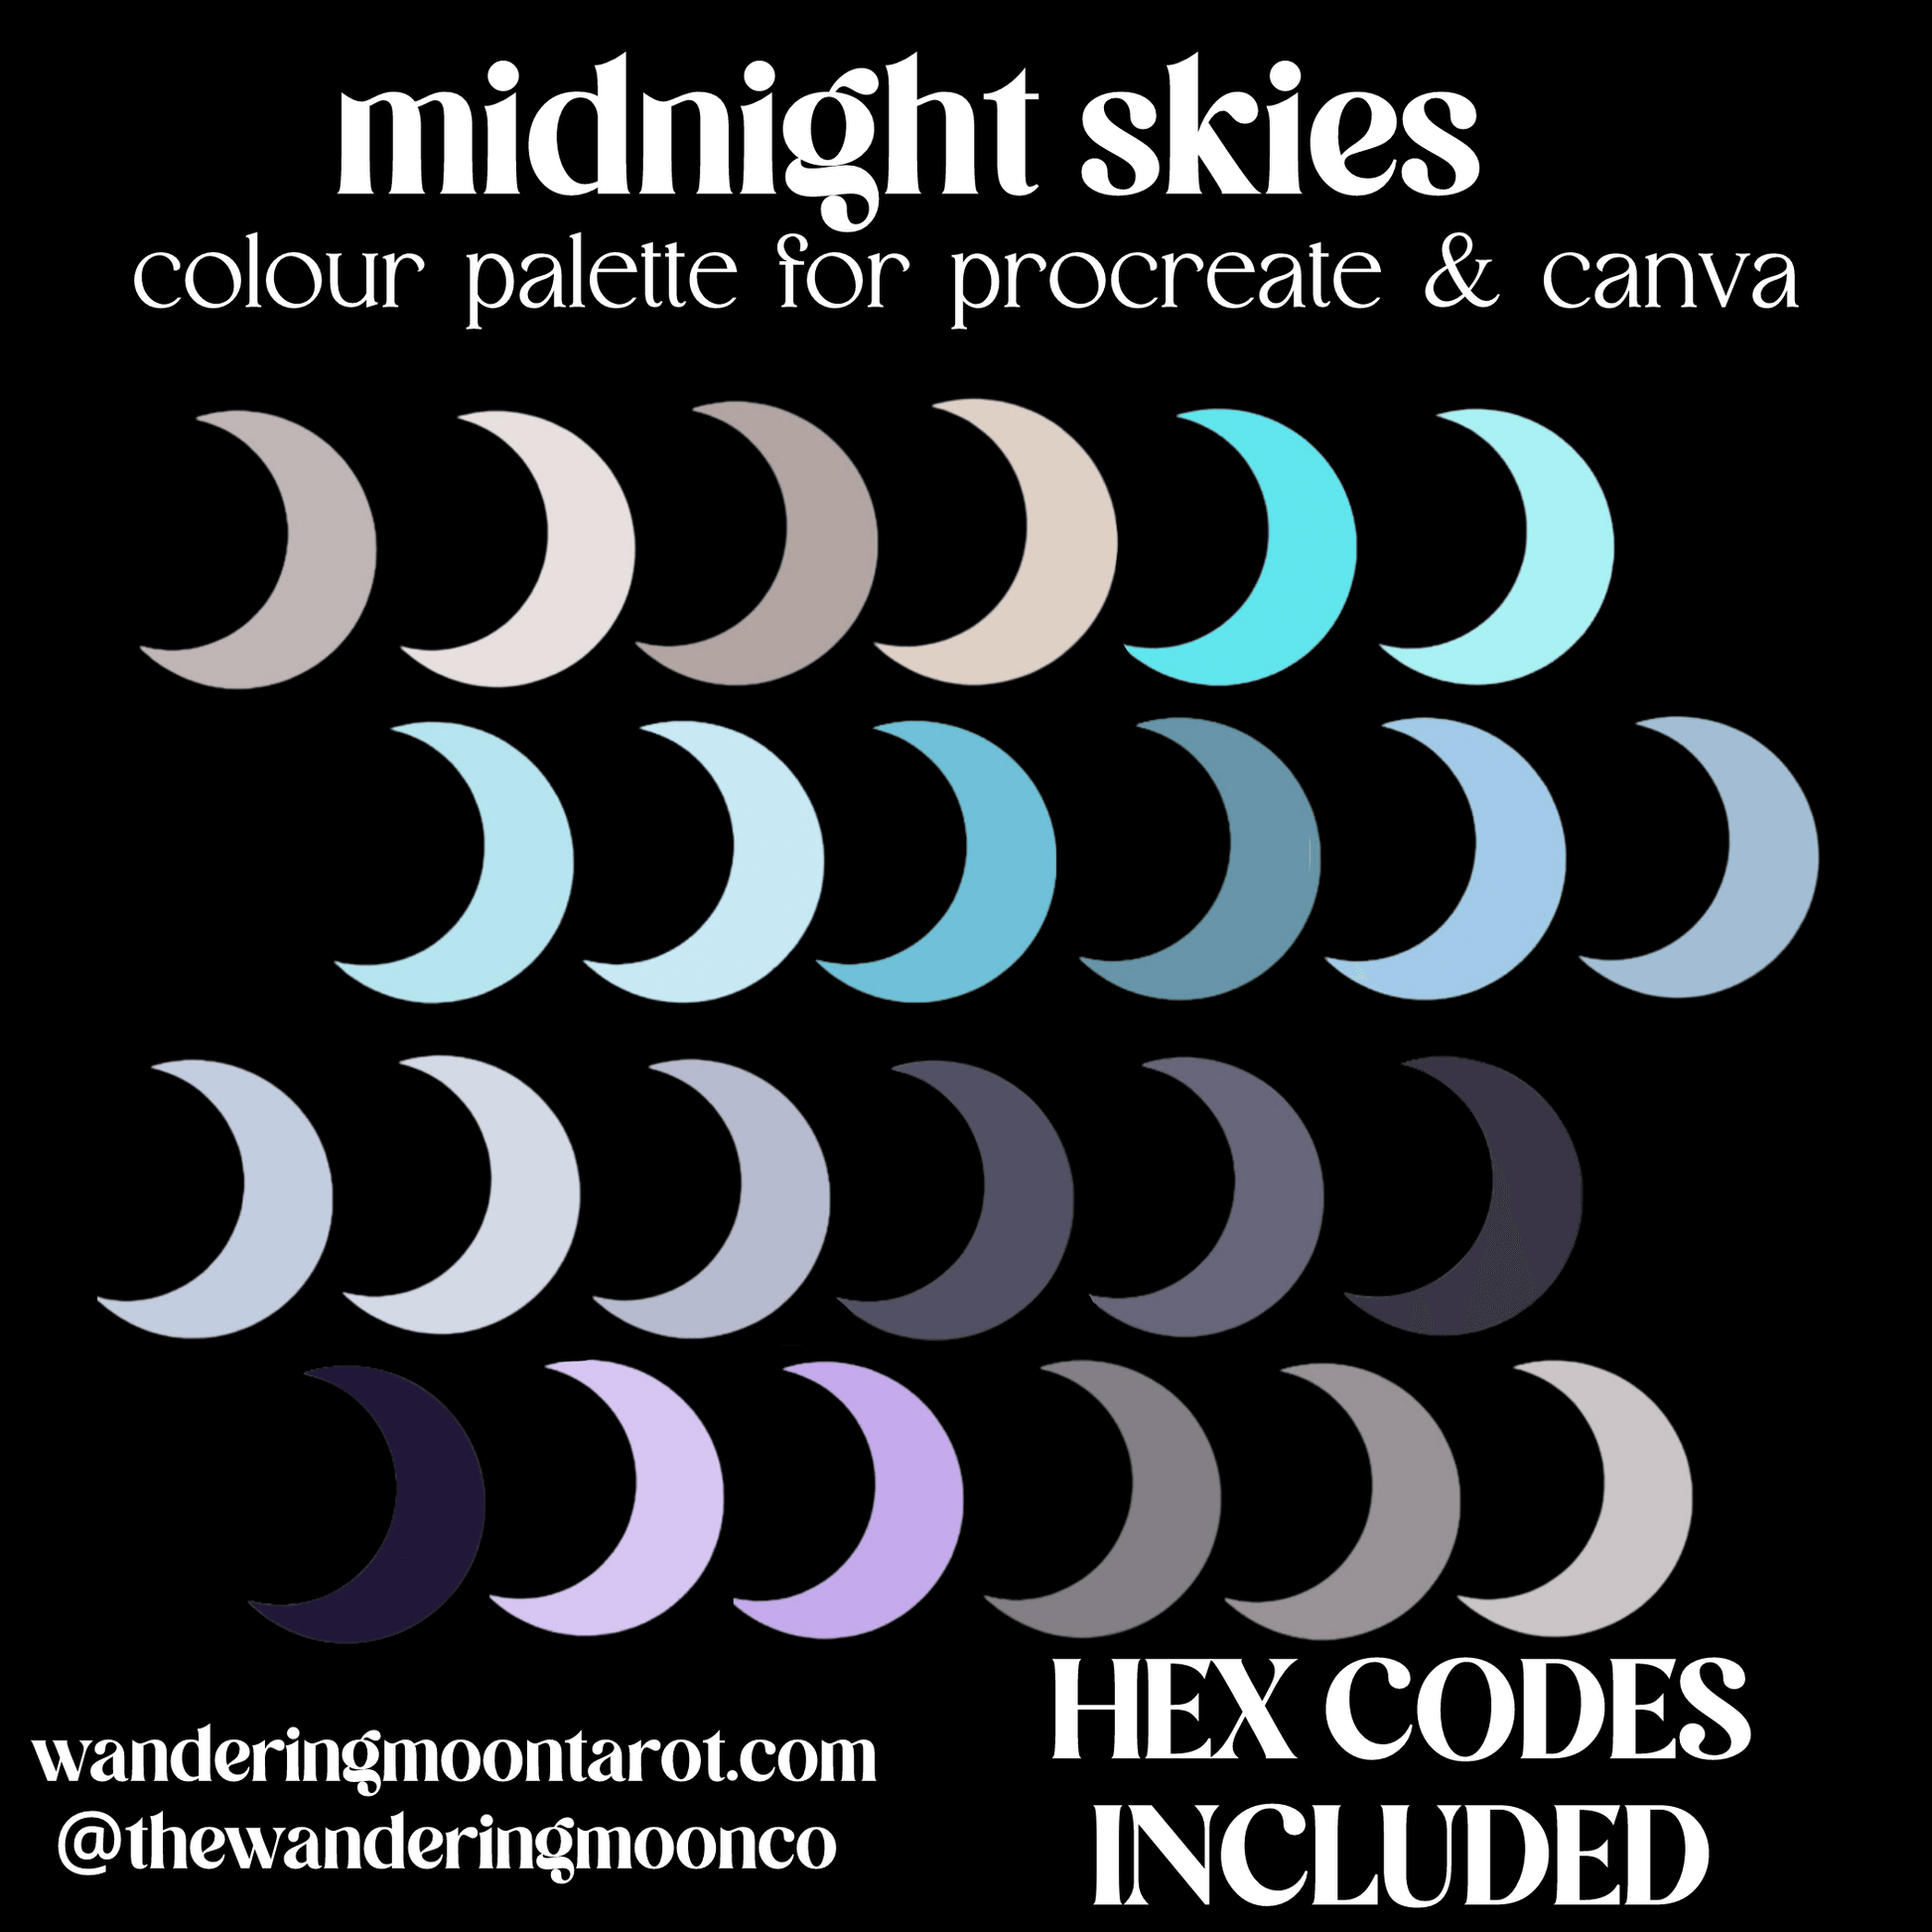 colour palette - midnight skies: for procreate & canva